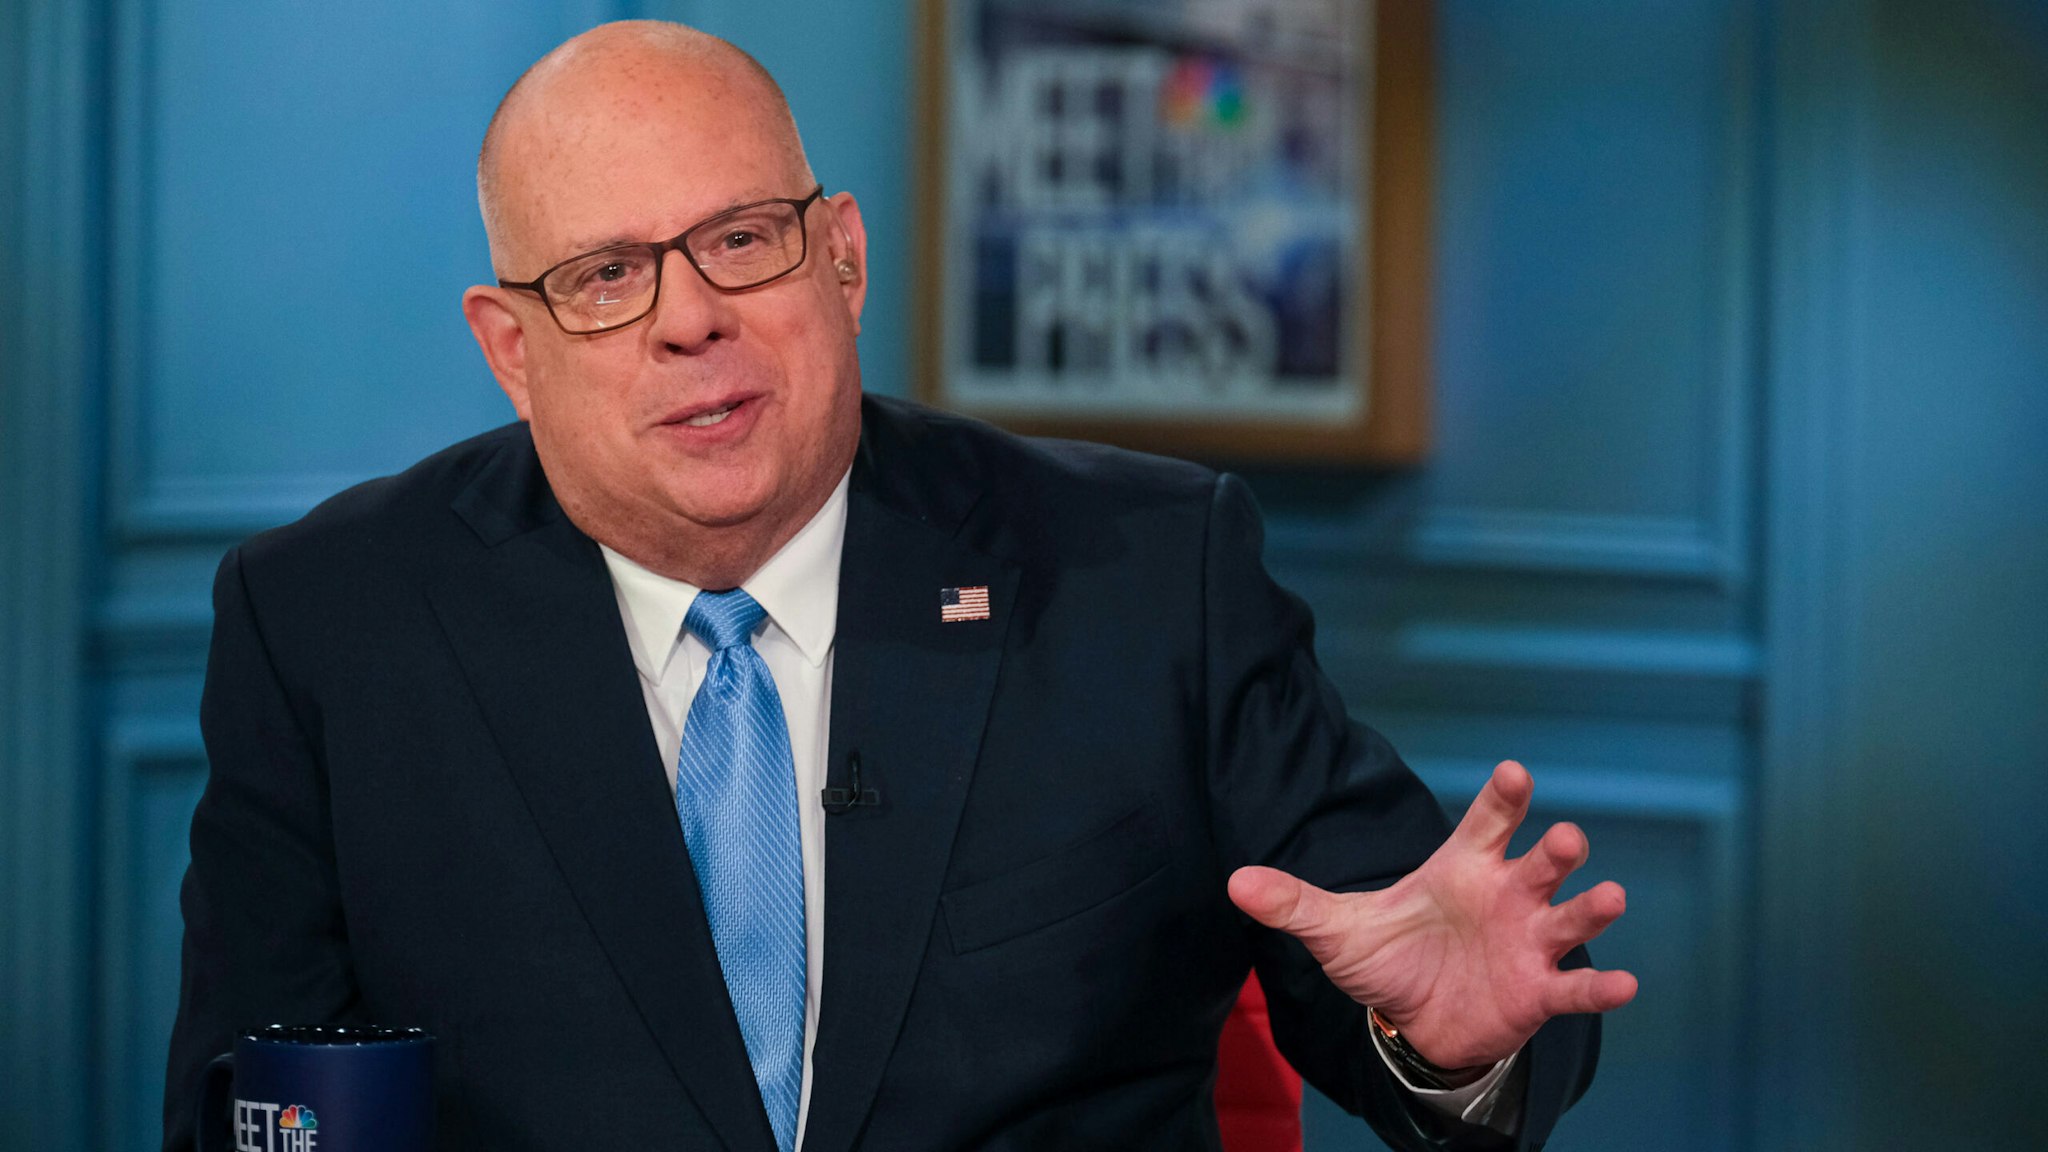 MEET THE PRESS -- Pictured: Maryland Gov. Larry Hogan appears on Meet the Press in Washington, D.C. Friday, July 10, 2022.